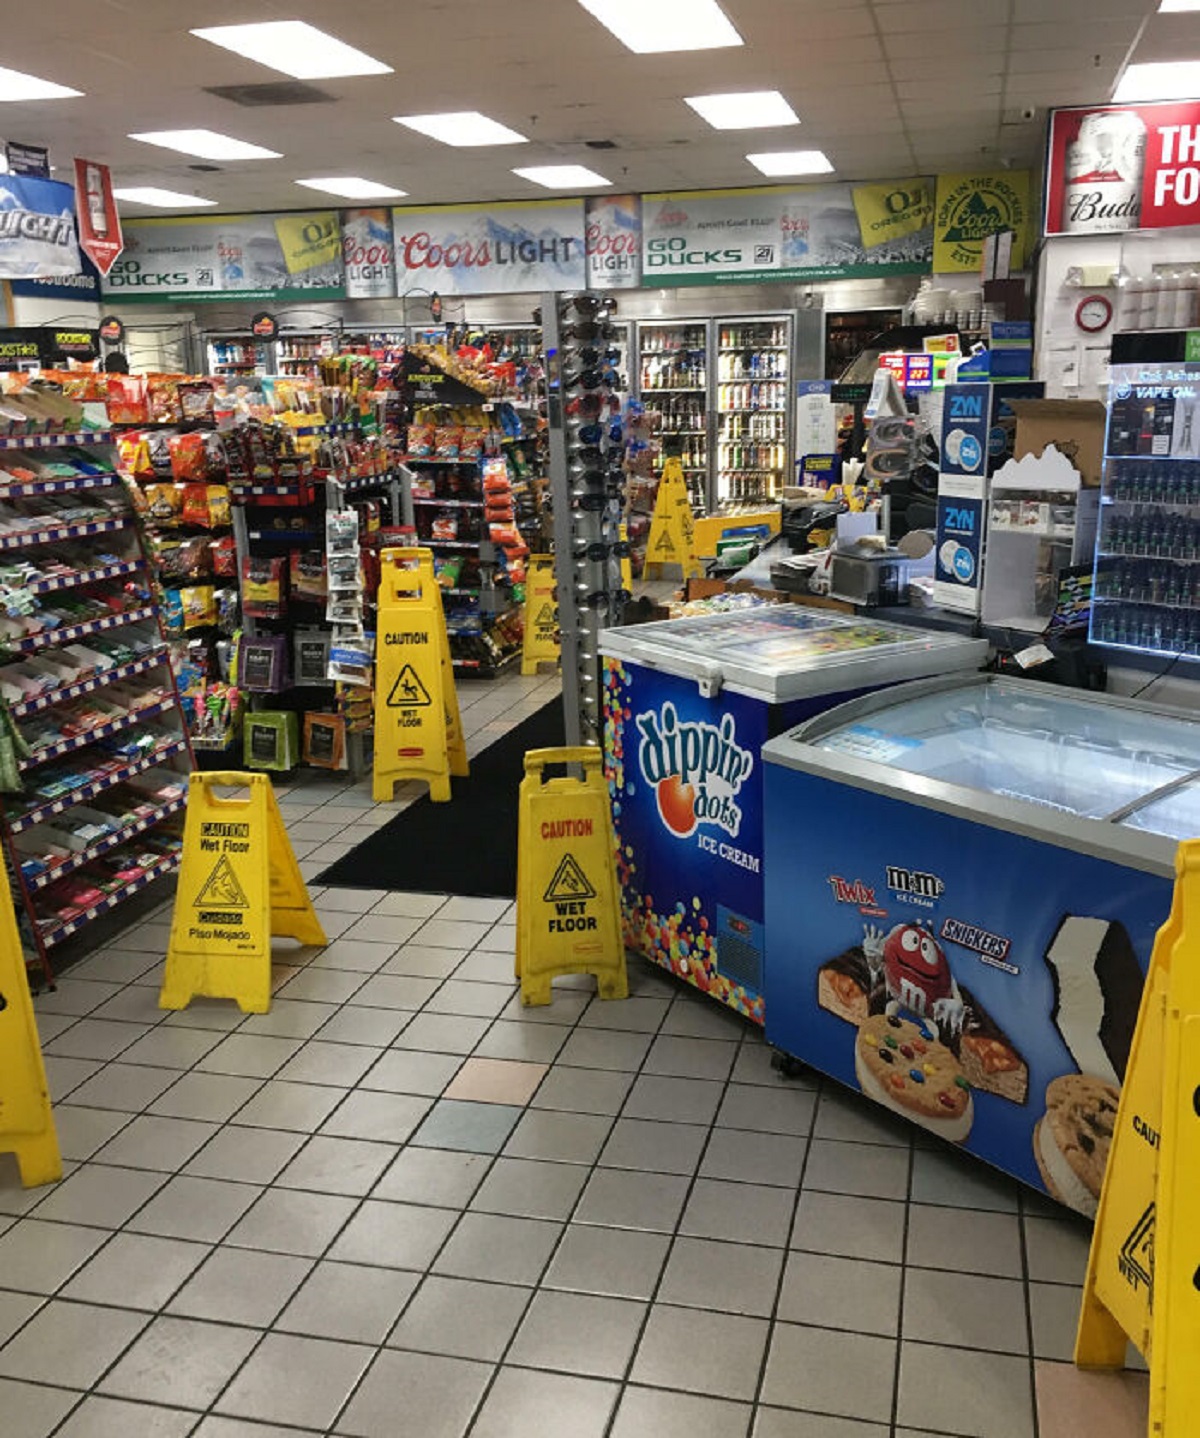 wet floor sign at grocery store - Bet 88 Can Minanst Cartion Hipp Floor Buch The Fo